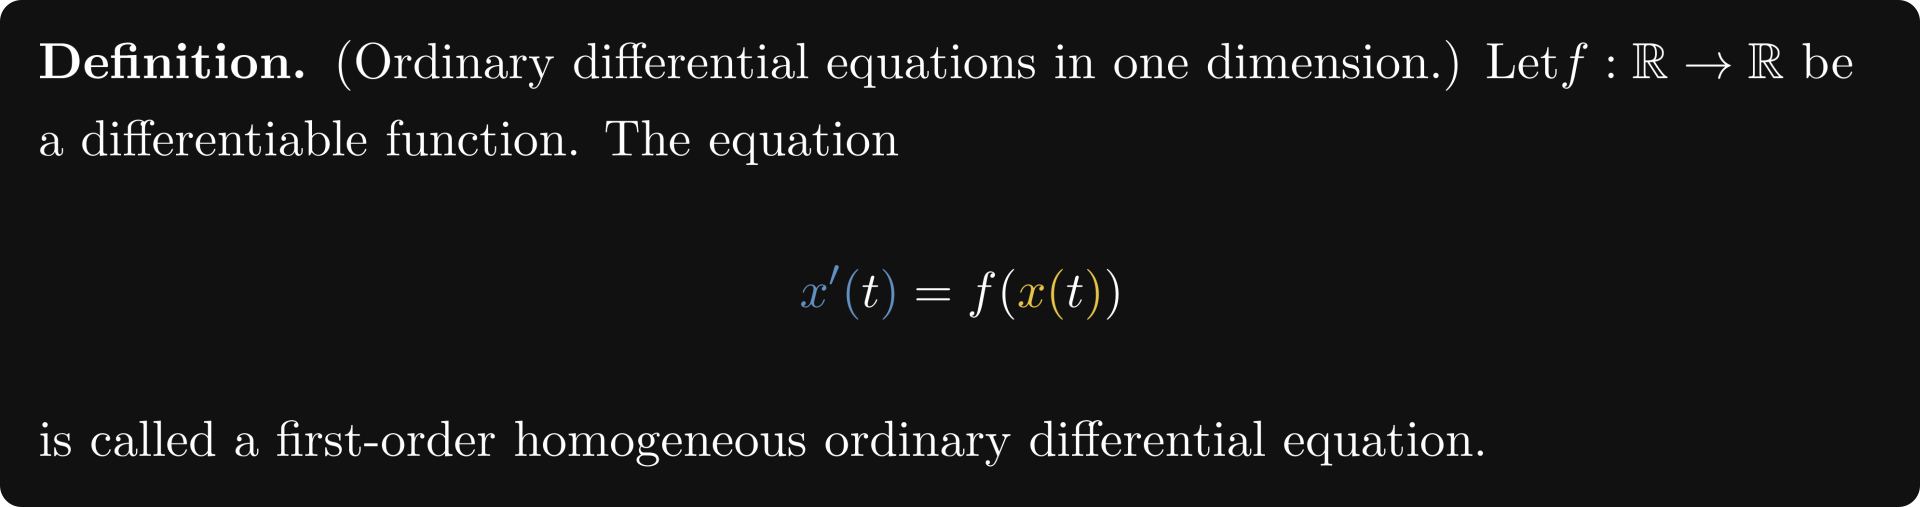 Definition of the ordinary differential equation